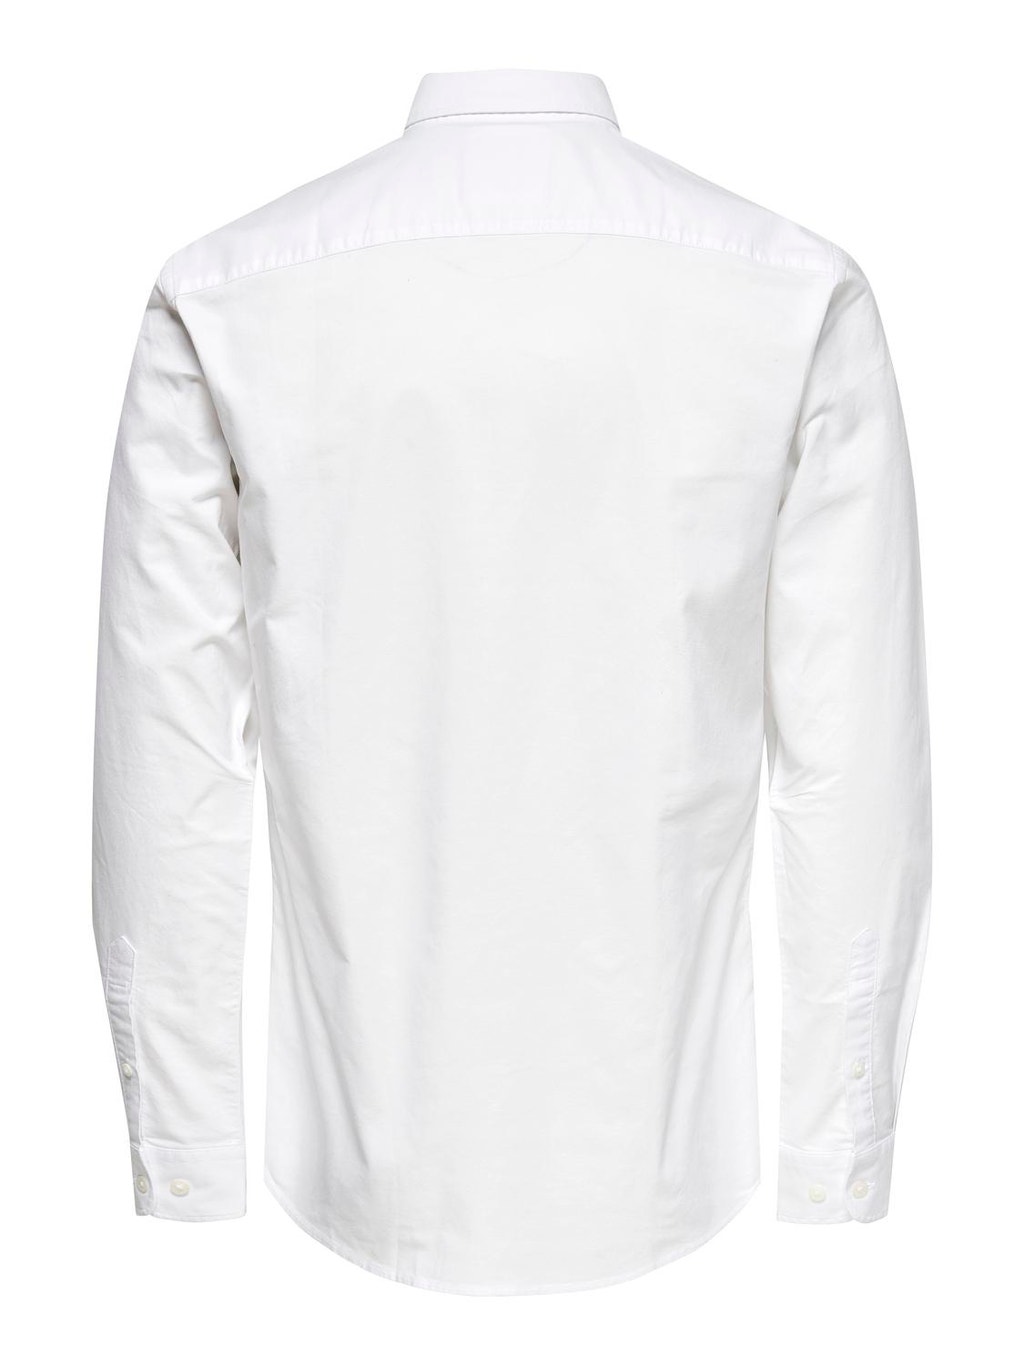 Slim fit shirt | White | ONLY & SONS®